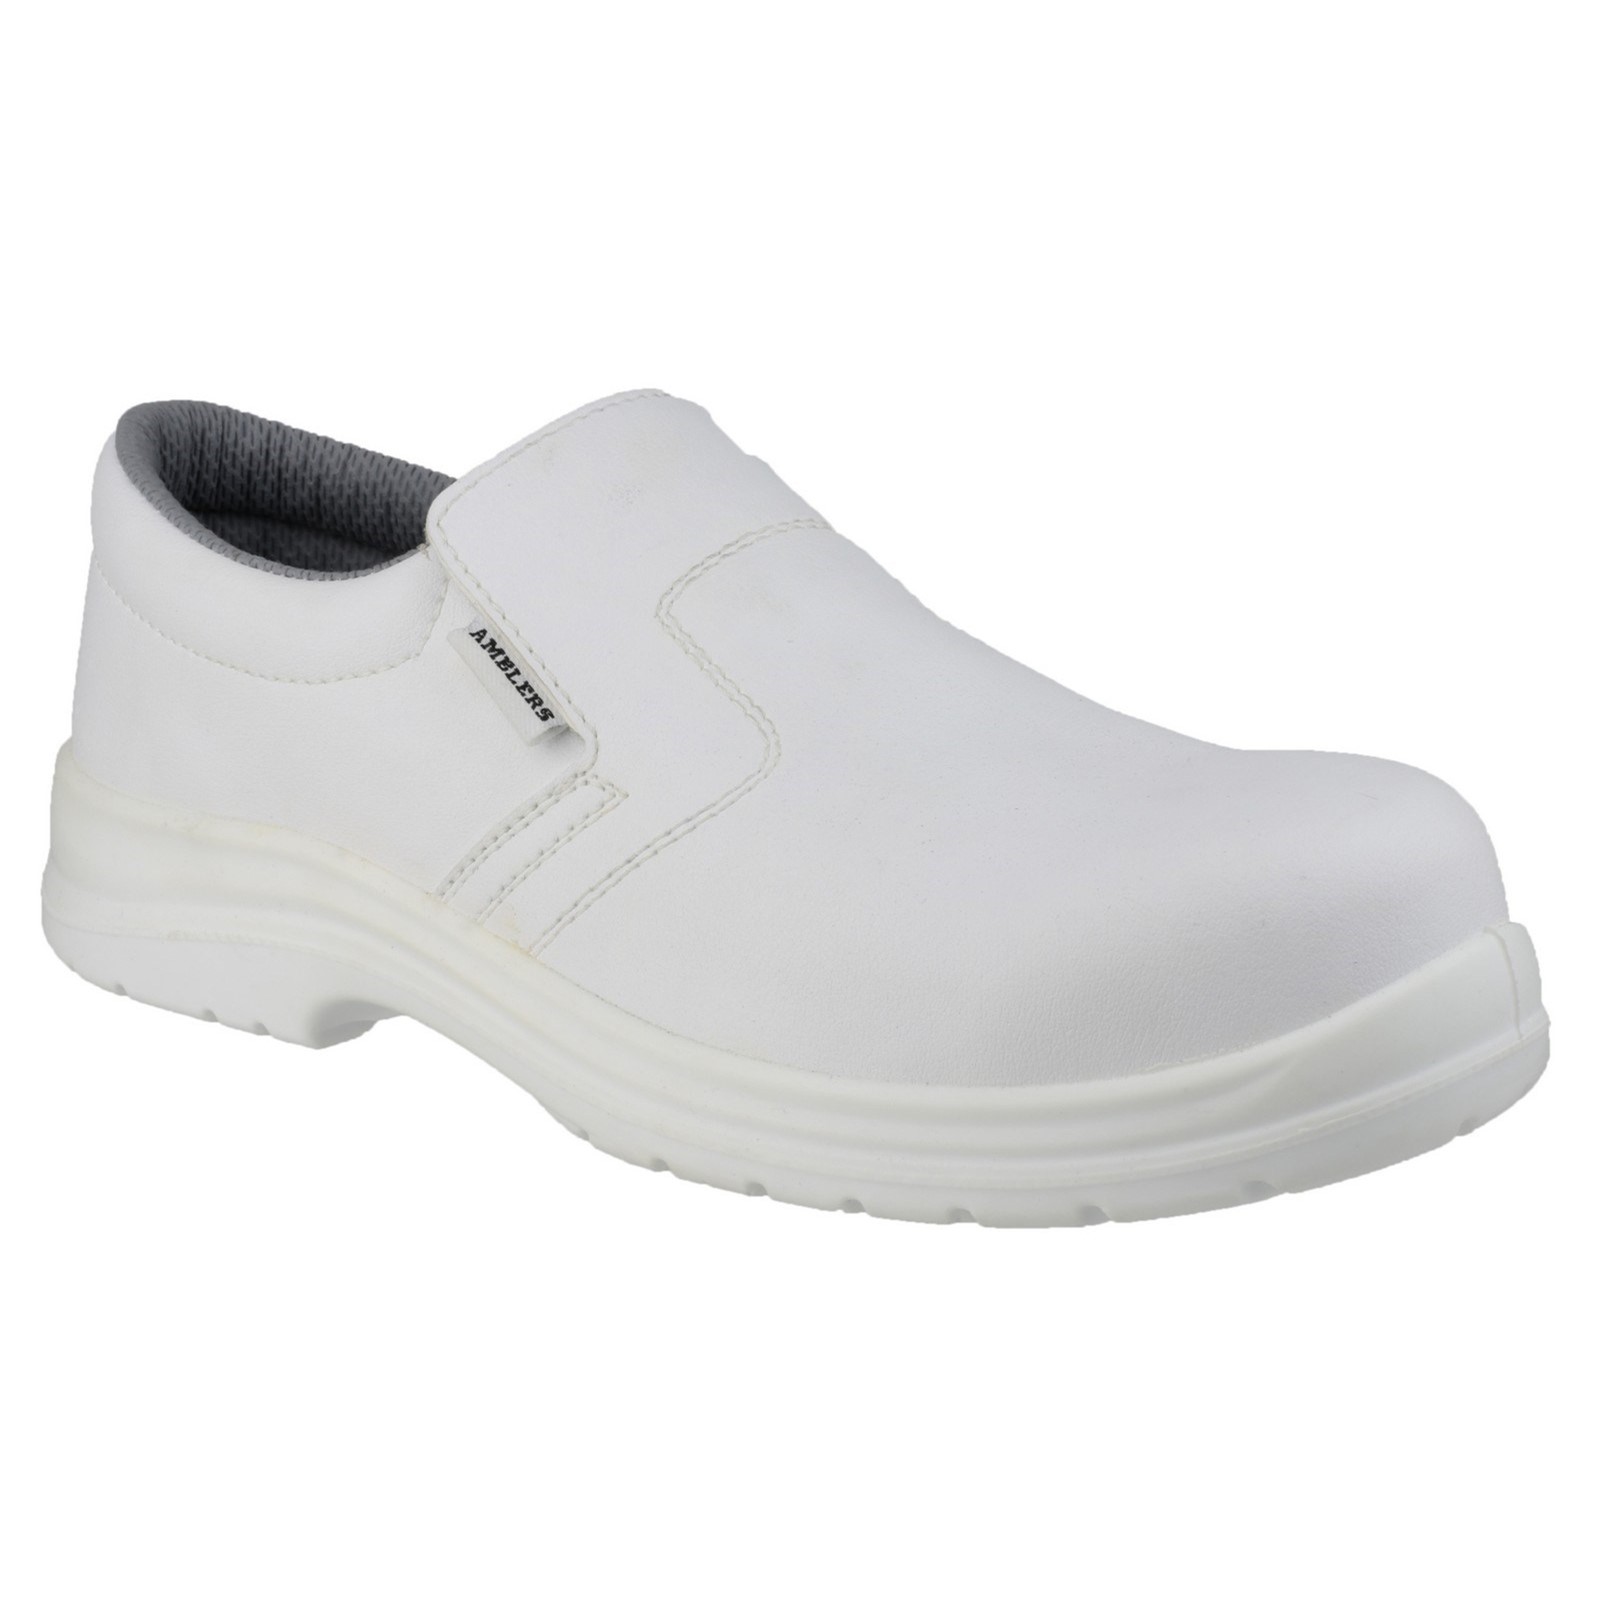 Catering & Medical Safety Footwear